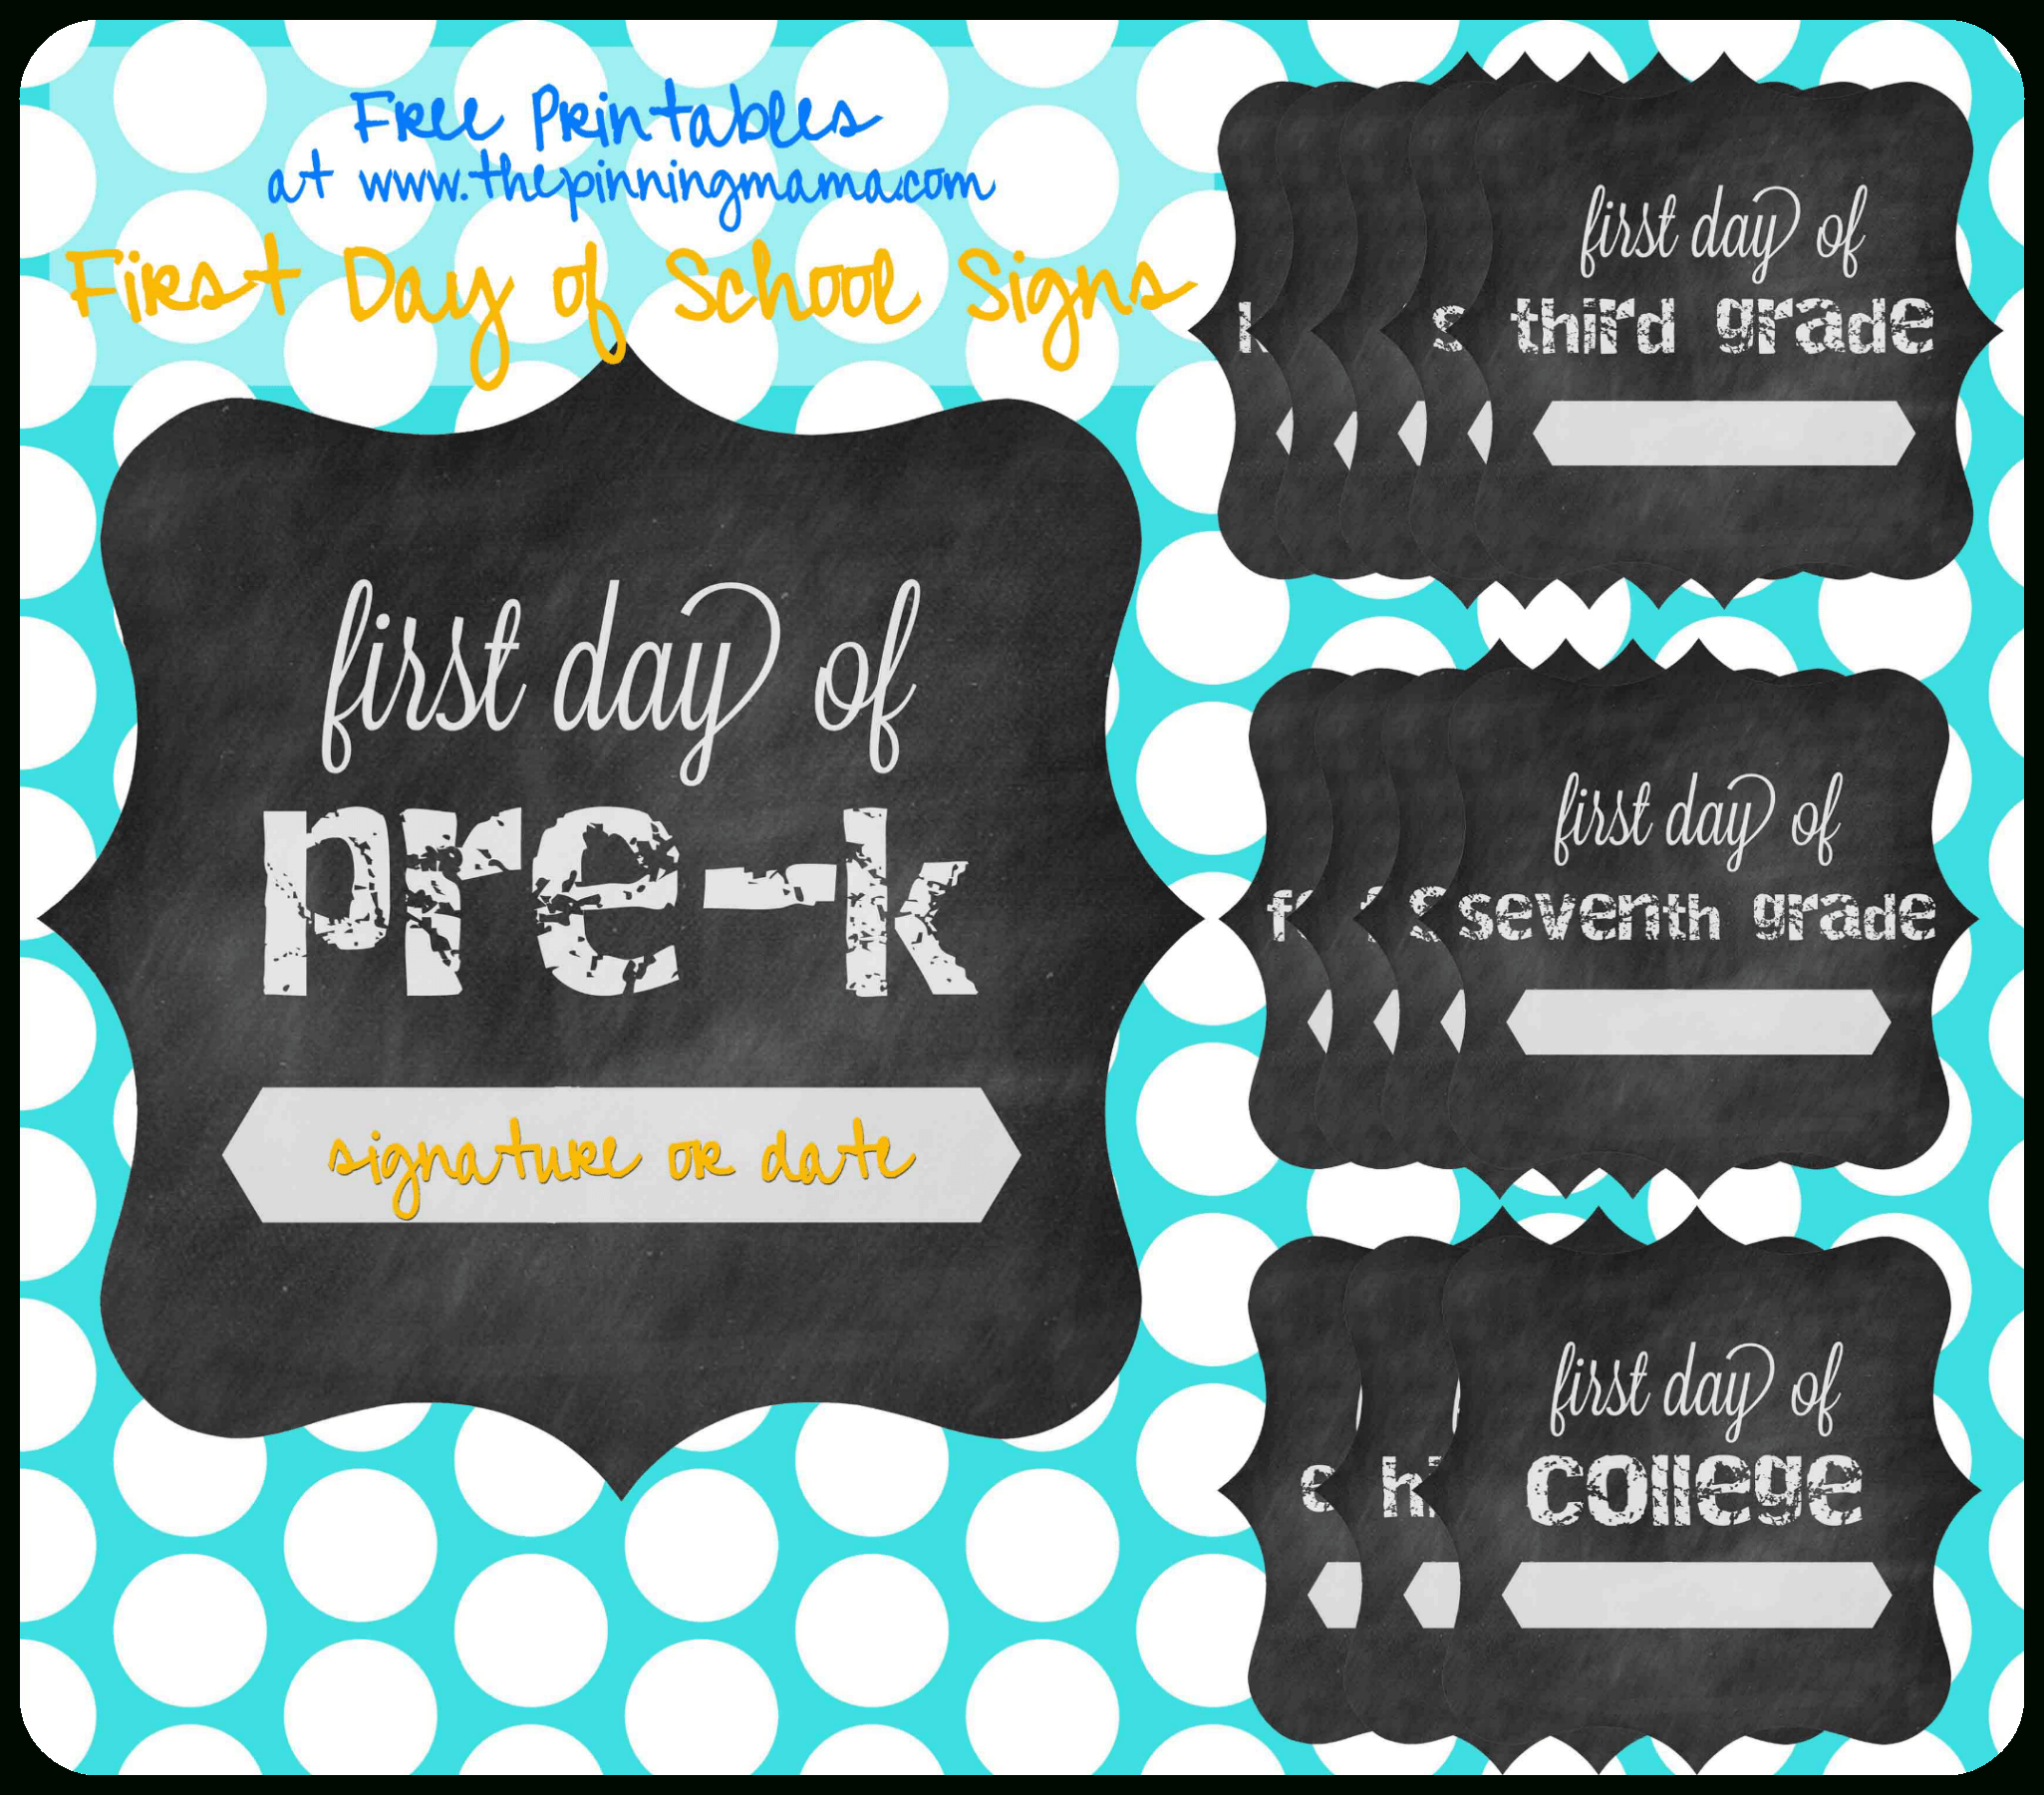 Free Printable} First Day Of School Chalkboard Sign • The Pinning Mama - Free Printable First Day Of School Chalkboard Signs